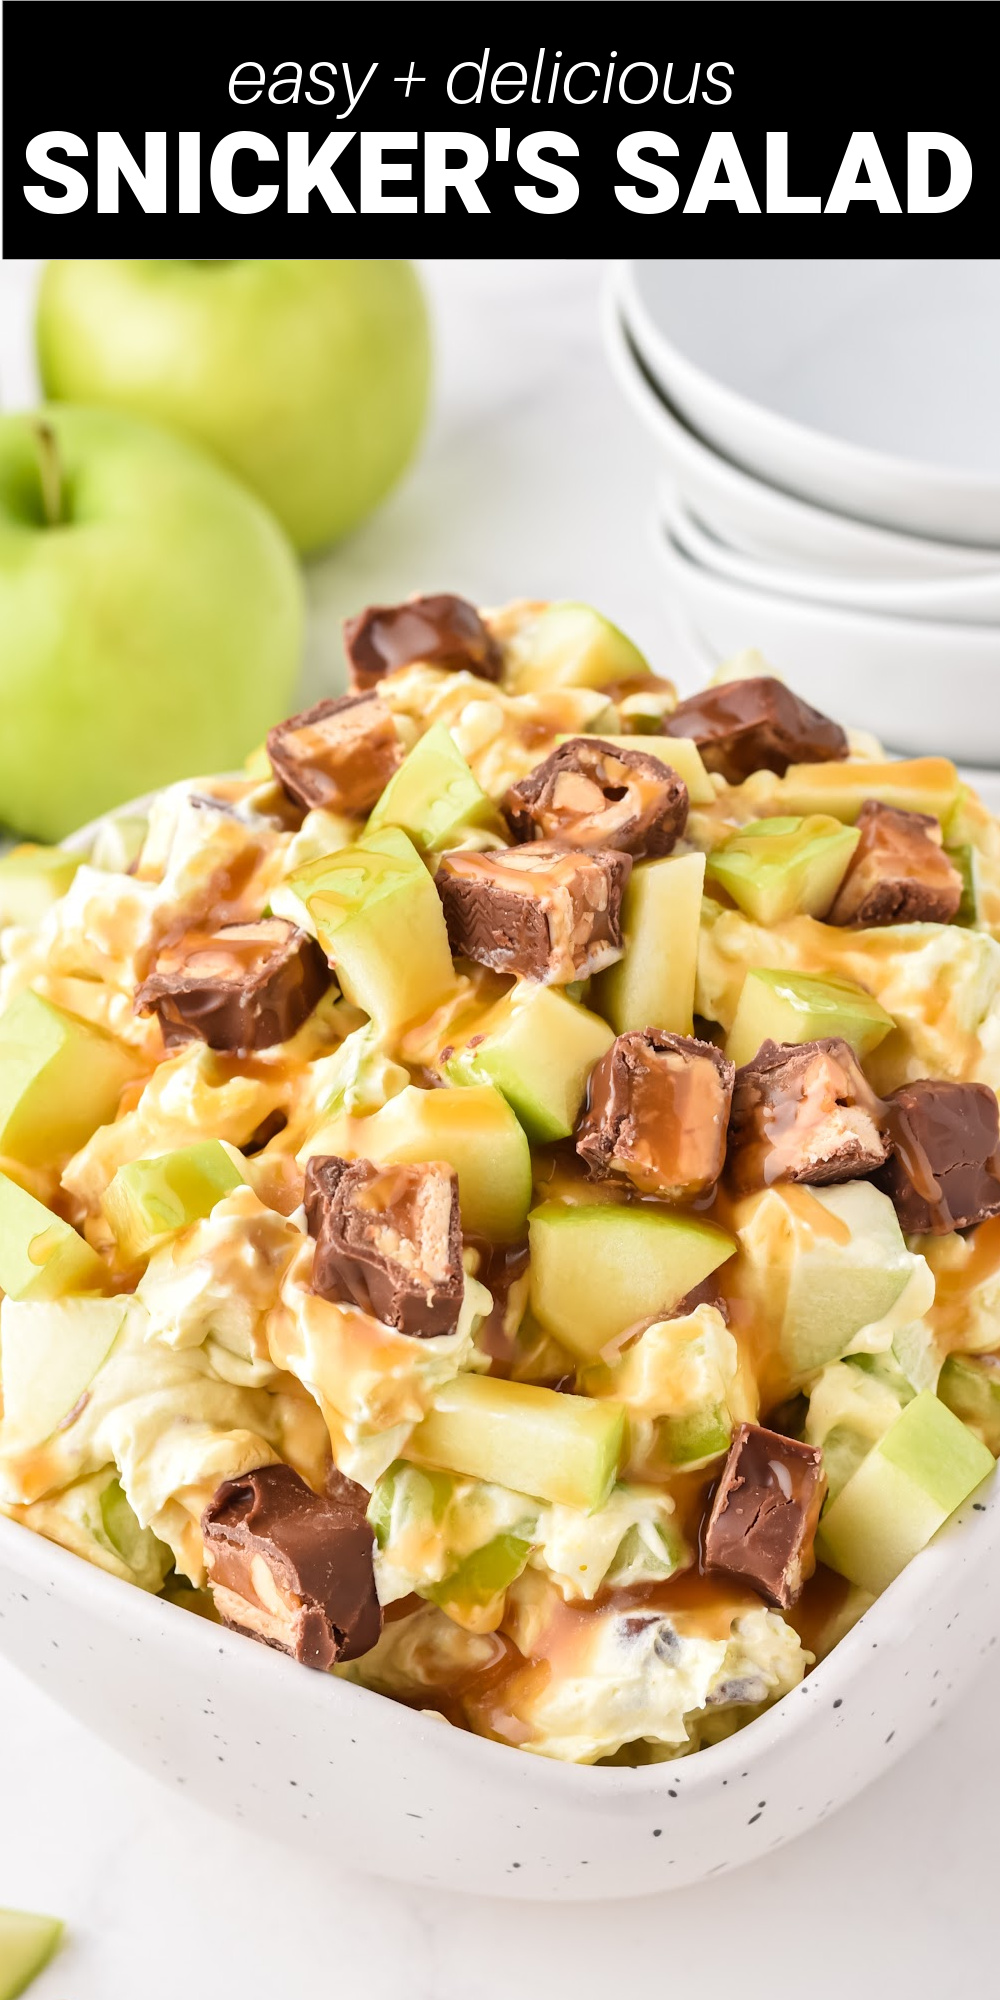 This delicious Snickers Salad is a sweet and tart dessert salad that will be a huge hit at your next potluck or family gathering. Tart green apples and sweet Snicker bars are mixed into a creamy pudding and whipped topping base to create a fluffy and decadent dessert that'll have all the kids begging for seconds (and the adults too)!